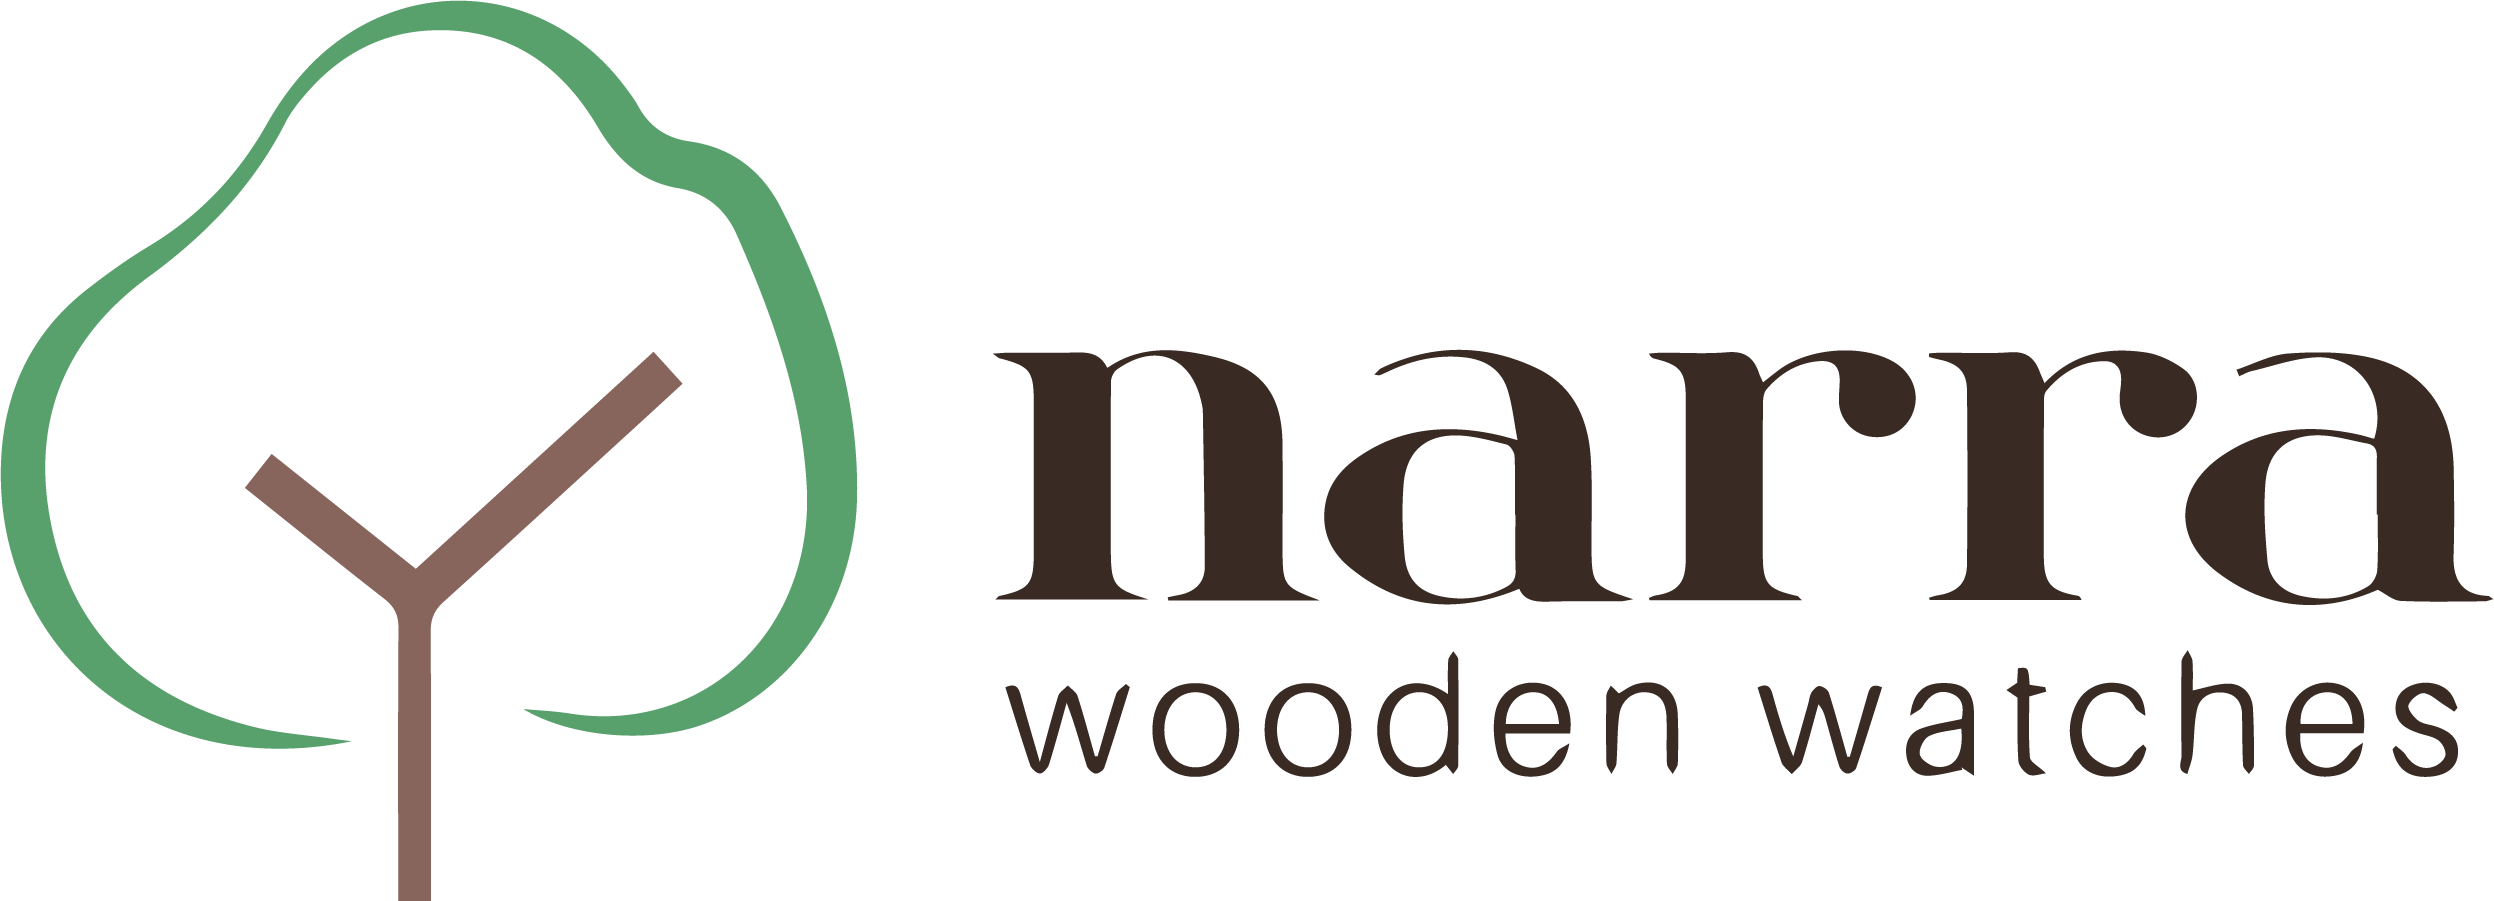 Watches Logo - Wooden watches by Narra Watches. Watches made from nature. Narra